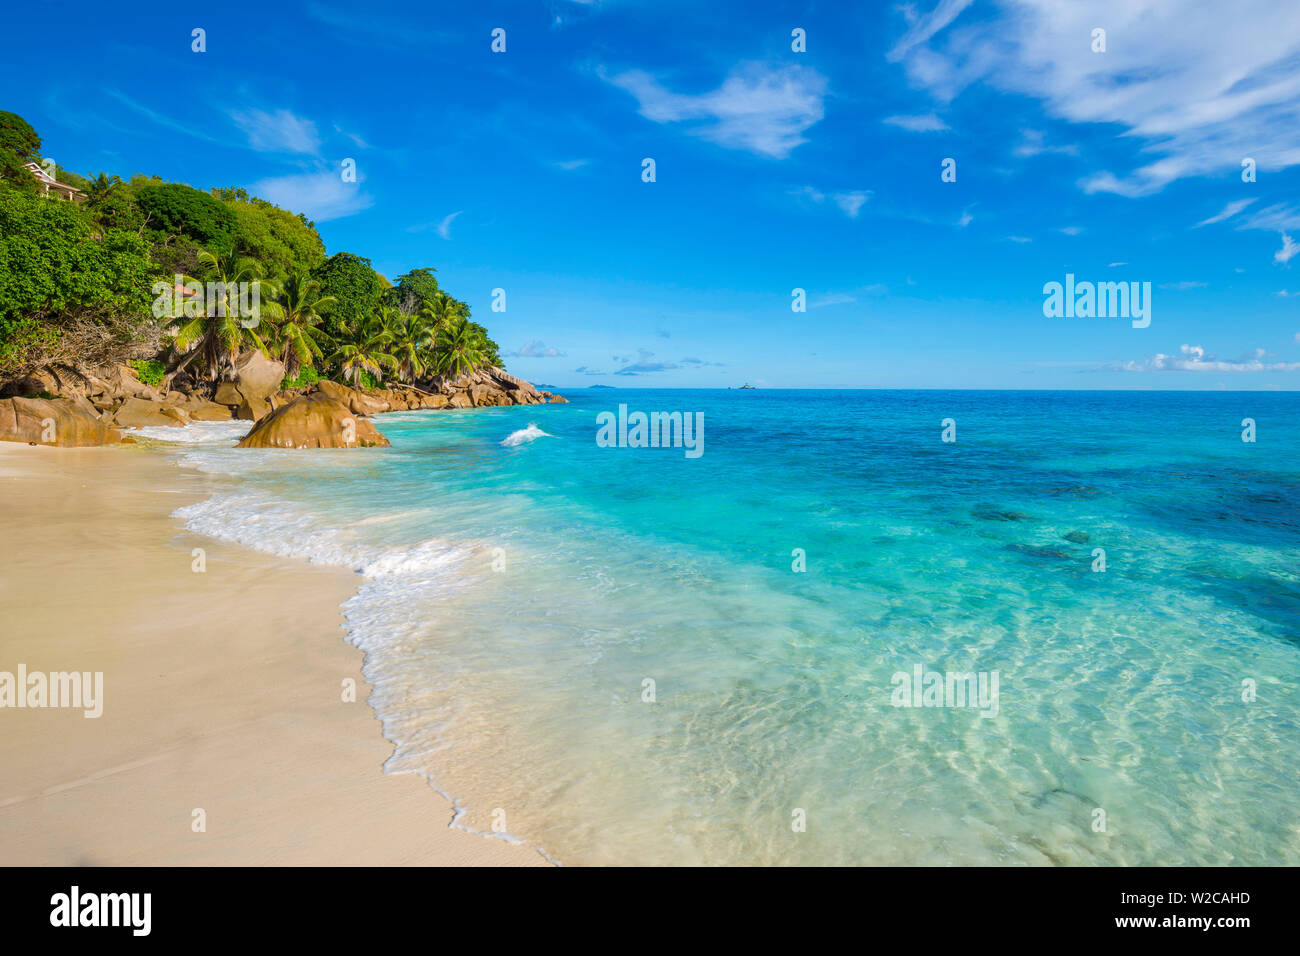 Palm trees and tropical beach, La Digue, Seychelles Stock Photo